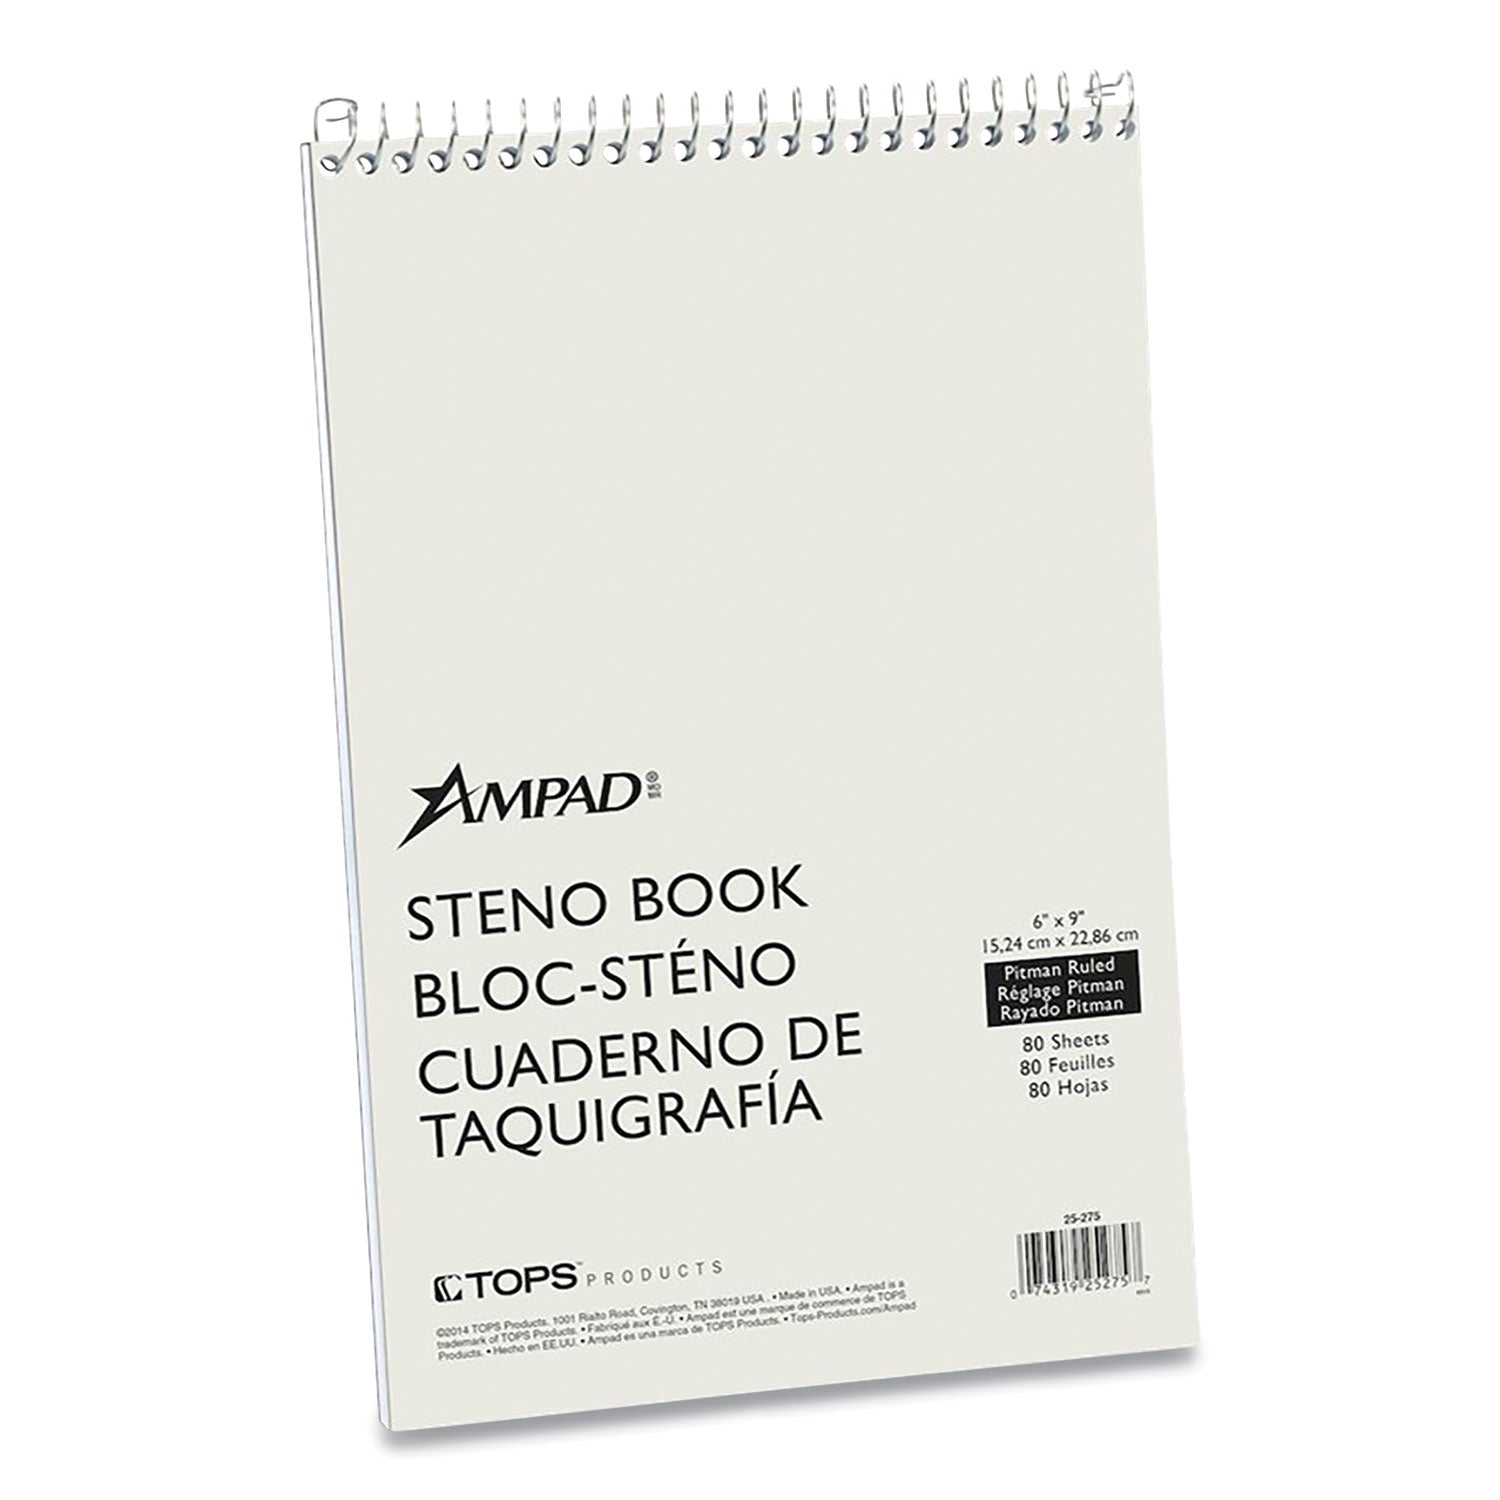 steno-pads-pitman-rule-white-cover-80-green-tint-6-x-9-sheets_amp25275 - 1